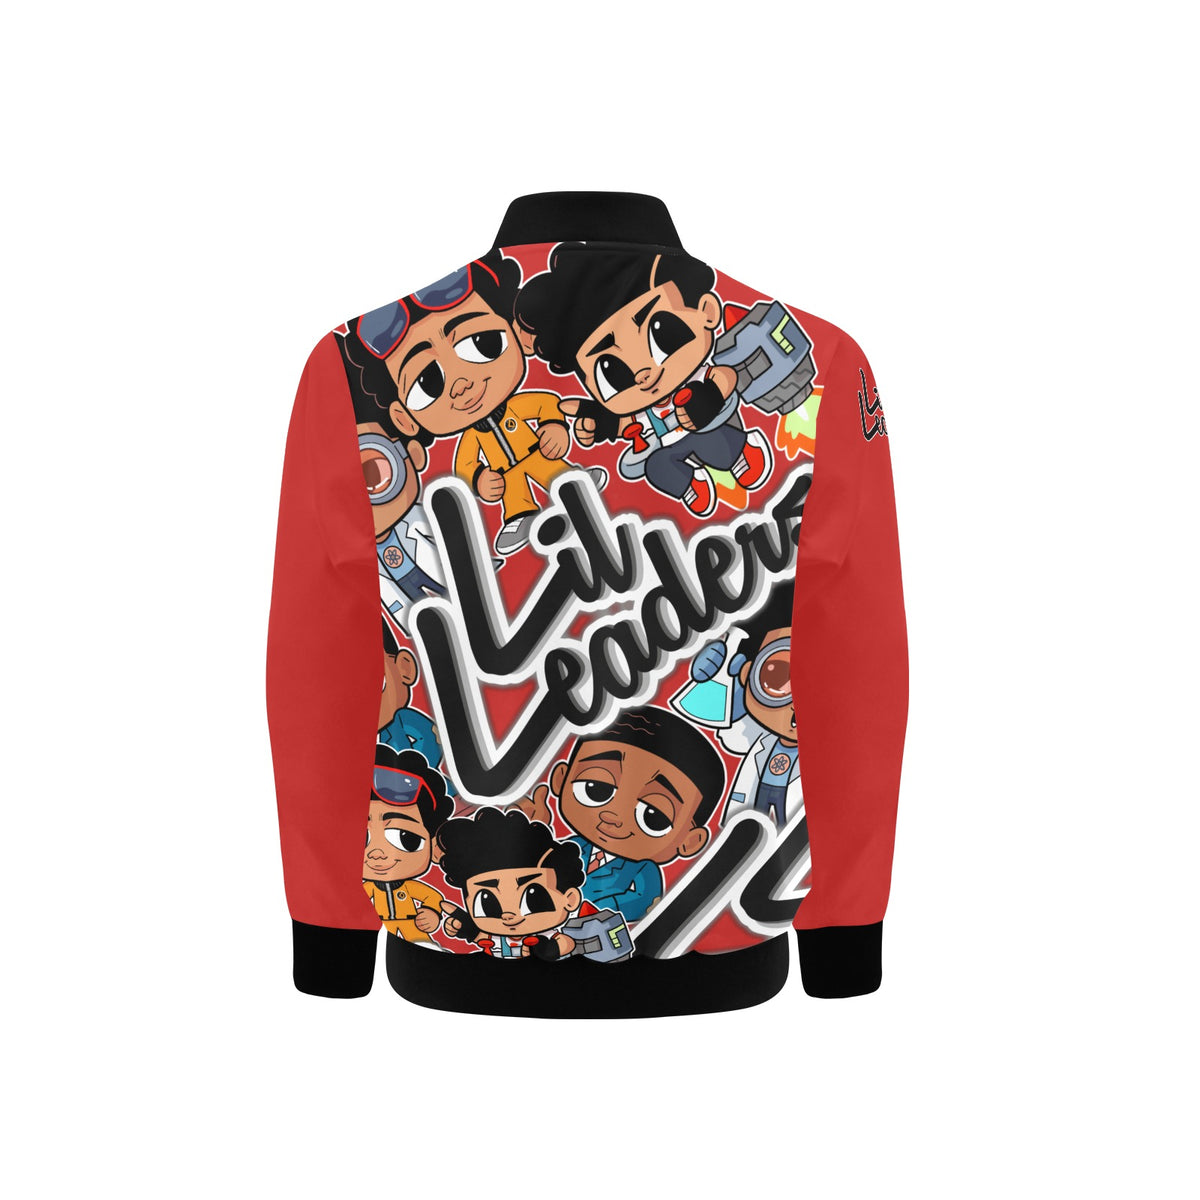 Lil Leaders "Boy Gang All Over" - Boys Bomber Jacket w/Pockets - (Red)